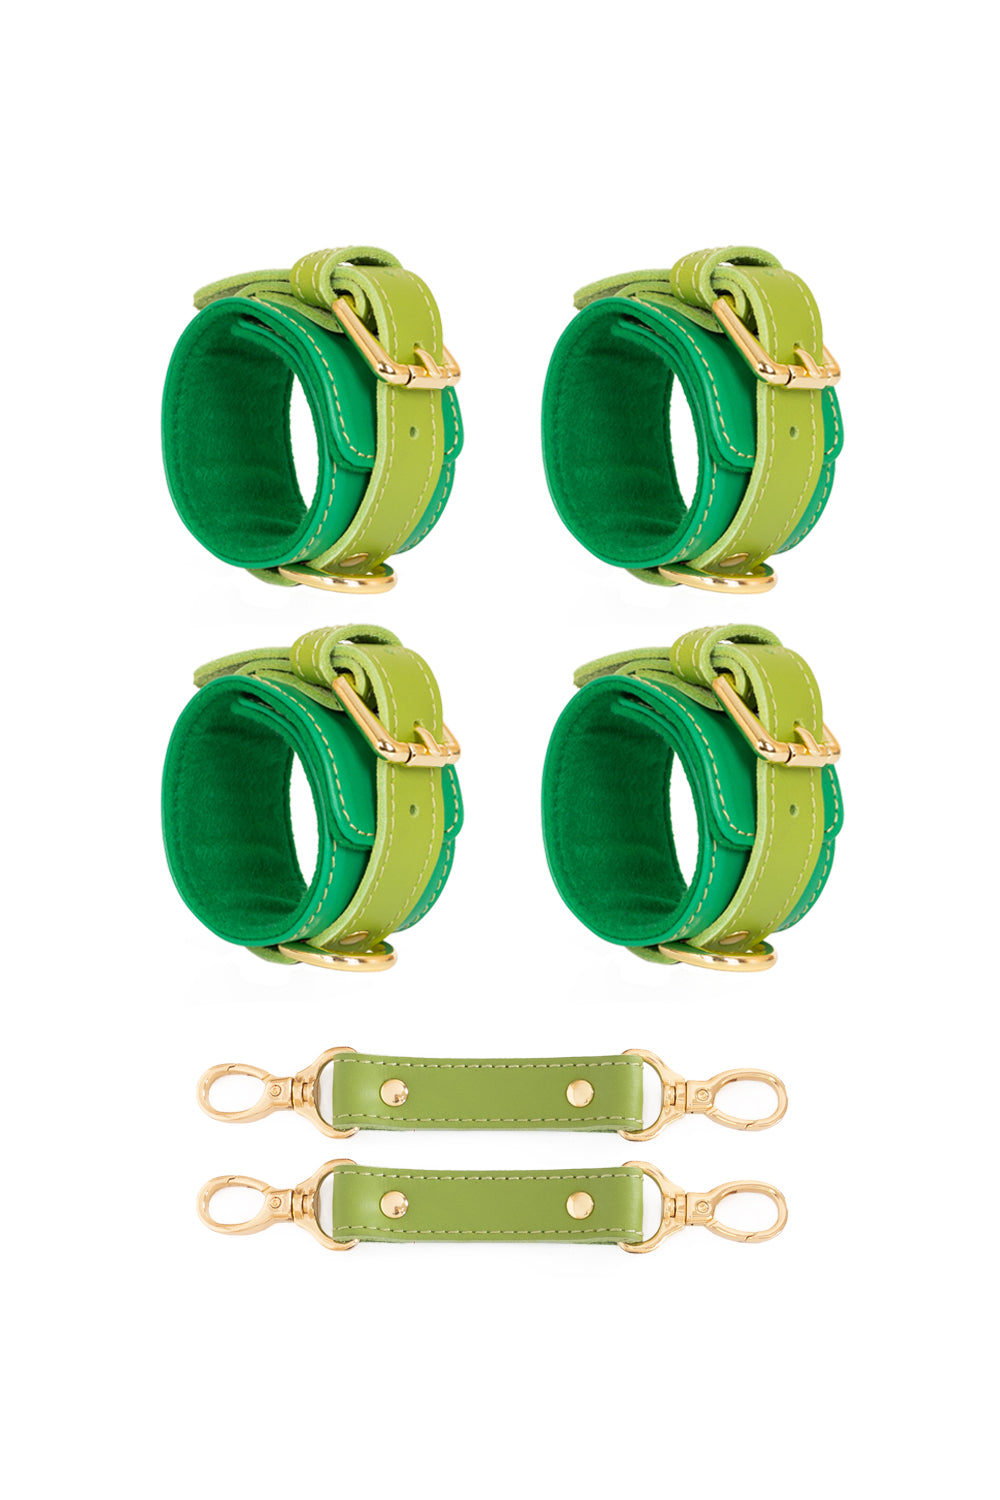 Deal of the day BDSM Leather Bondage Set Green